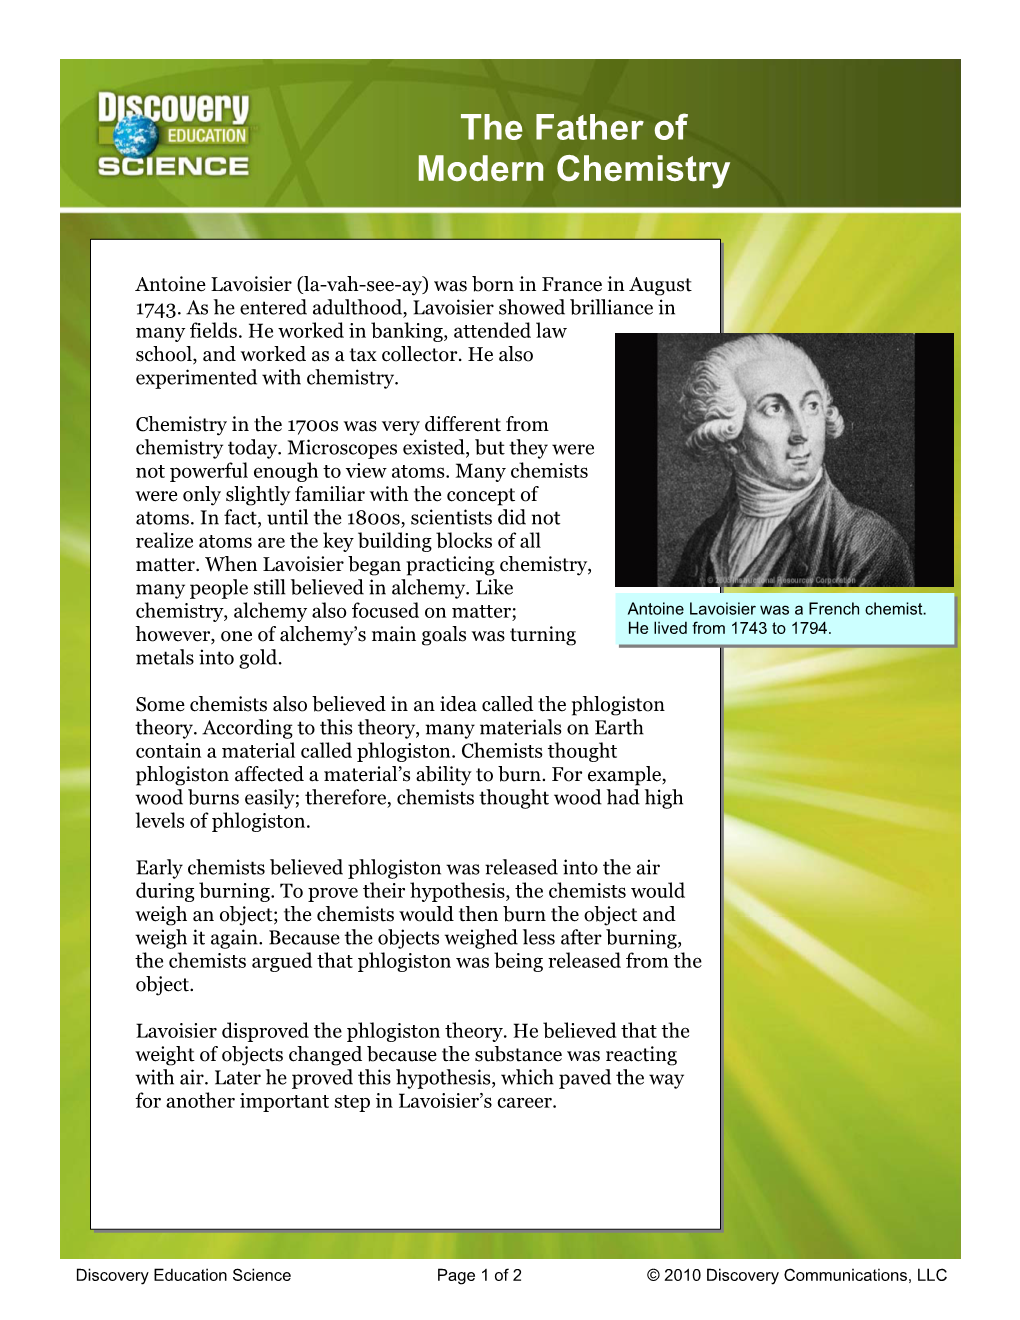 The Father of Modern Chemistry